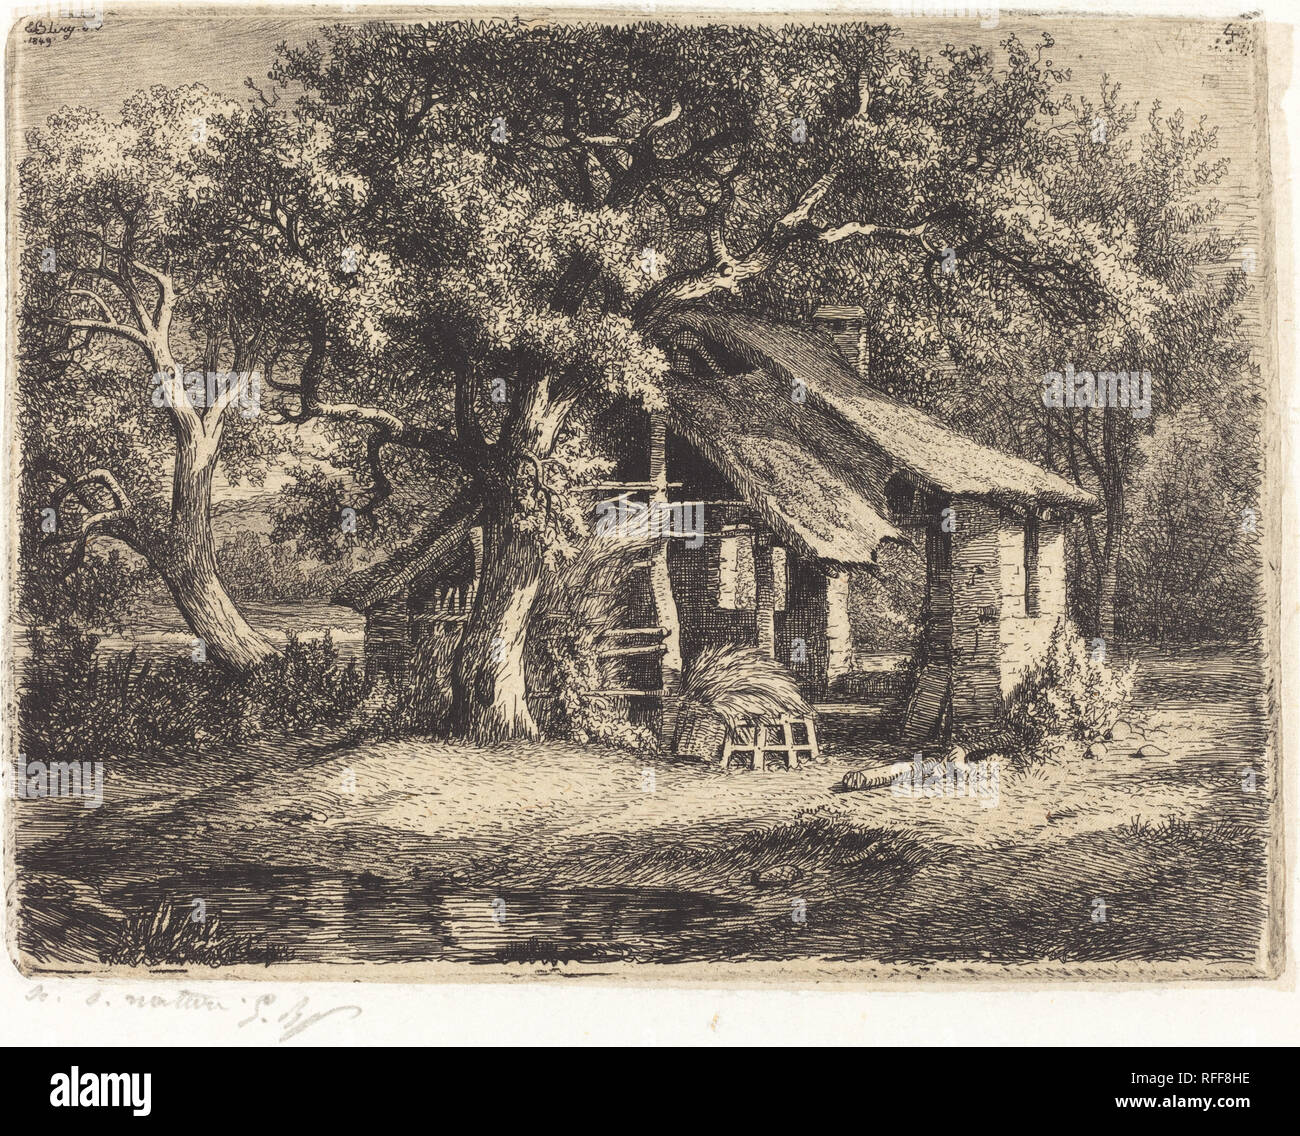 La chaumière au poirier (Cottage with Pear Tree). Dated: published 1849. Dimensions: plate: 10.6 x 14 cm (4 3/16 x 5 1/2 in.)  sheet: 22.5 x 31.5 cm (8 7/8 x 12 3/8 in.). Medium: etching on chine coll. Museum: National Gallery of Art, Washington DC. Author: Eugène Bléry. Stock Photo